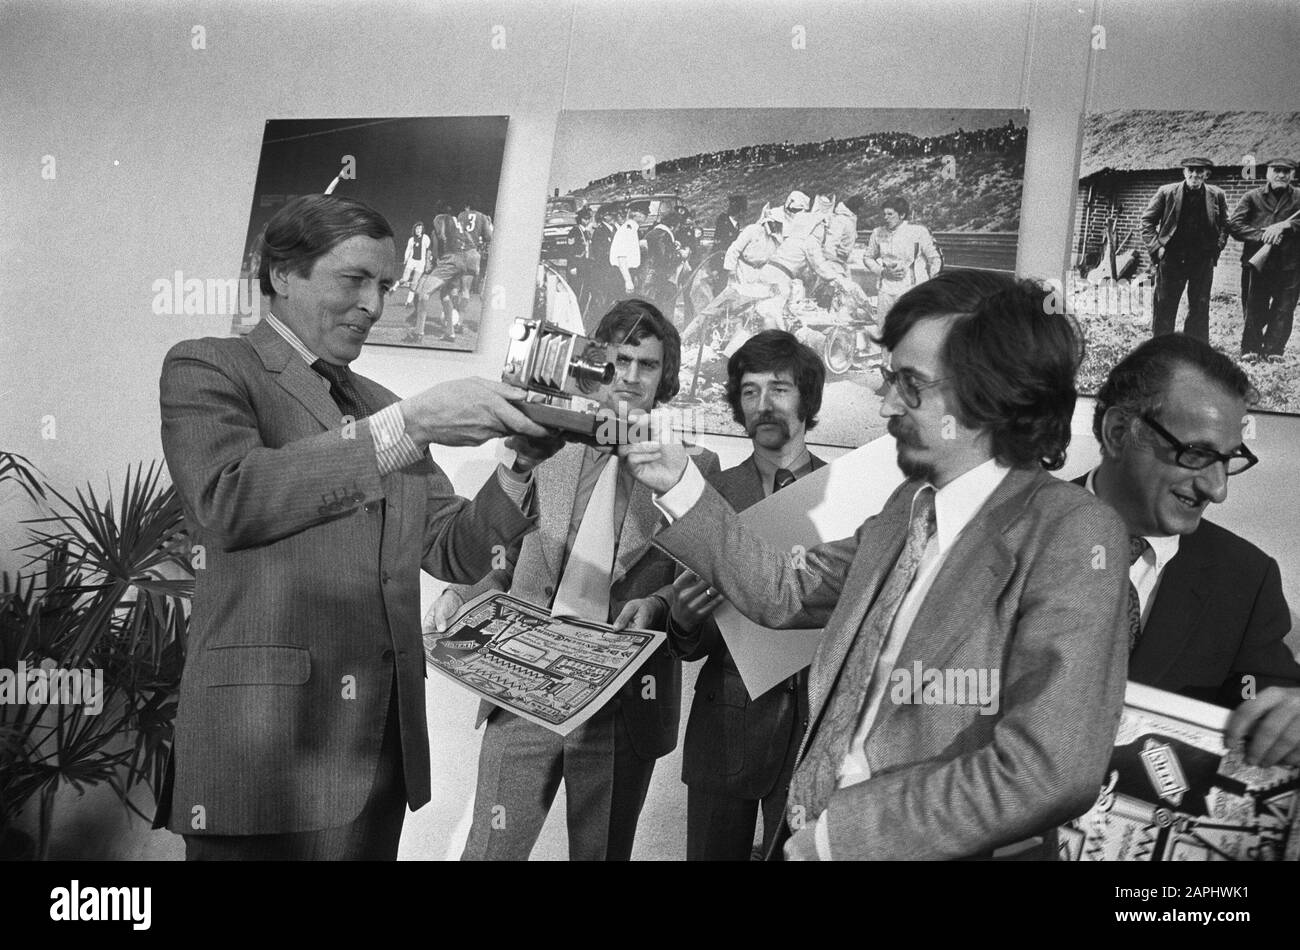 Prince Claus presents the Silver Camera to Rob Mieremet for the best Dutch press photo of 1973 Description: The prince hands over the Silver Camera to the winner Date: 22 November 1973 Location: Amsterdam, North Holland Keywords: photos, photographers, photo contests, press photography, princes Personal name: Claus, prince, Mieremet, Rob Stock Photo